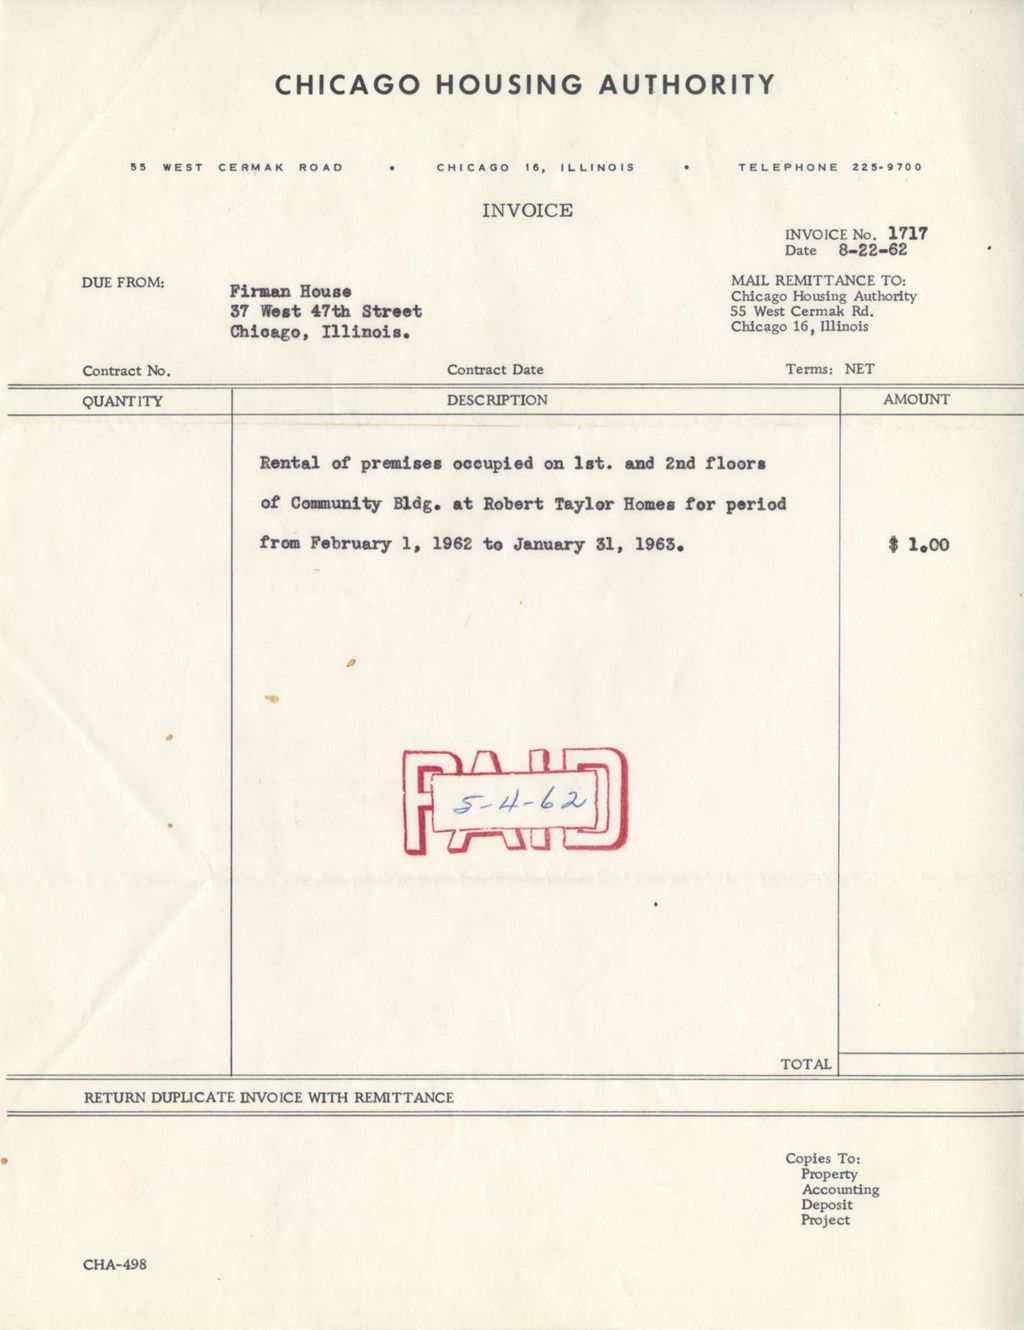 Miniature of Invoice from the Chicago Housing Authority